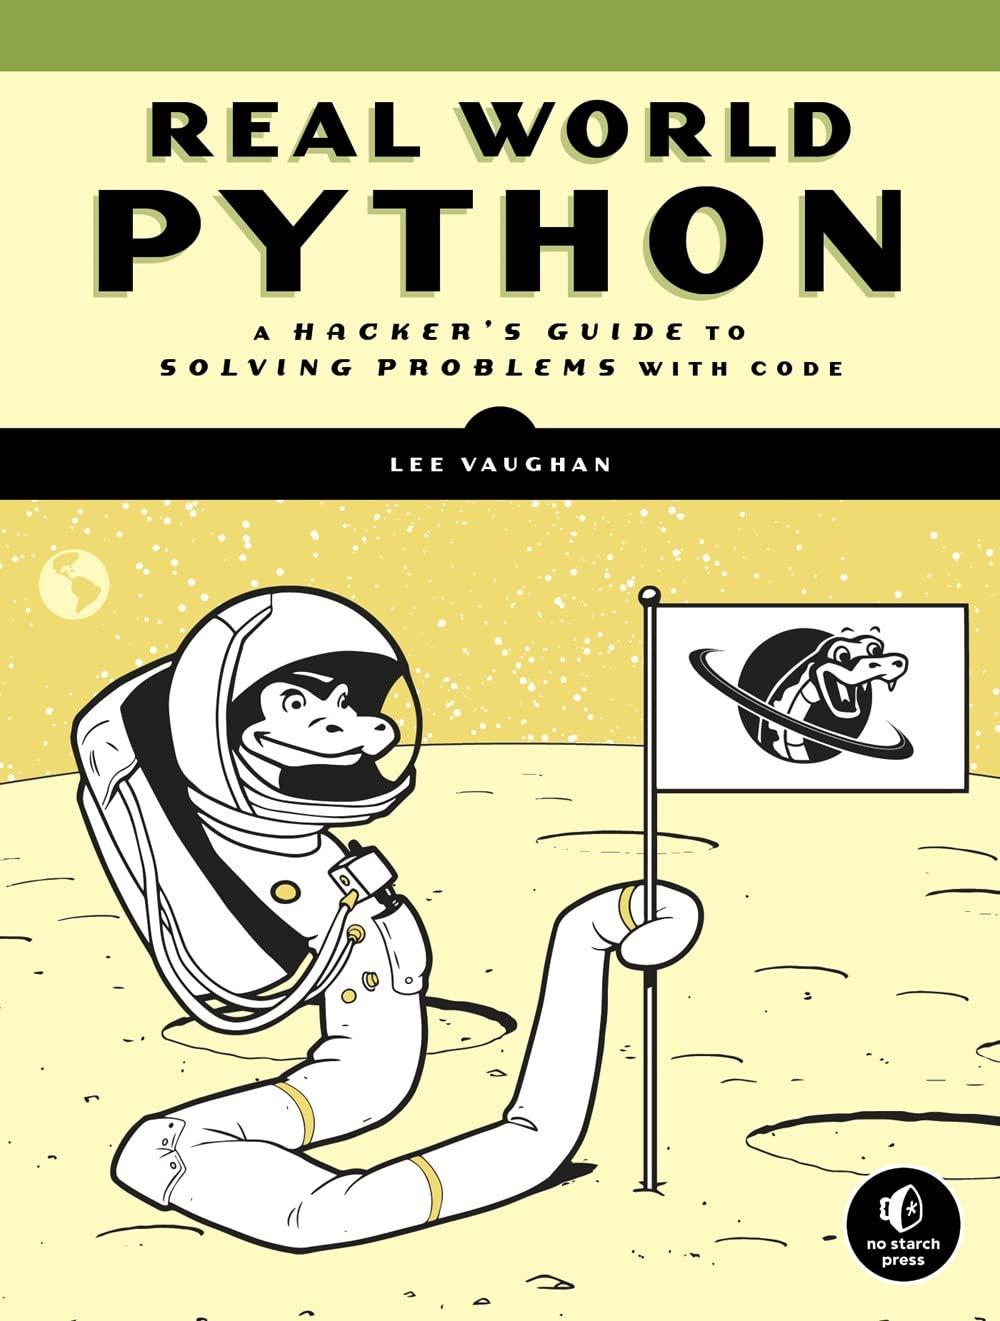 real world python a hacker's guide to solving problems with code 1st edition lee vaughan 1718500629,